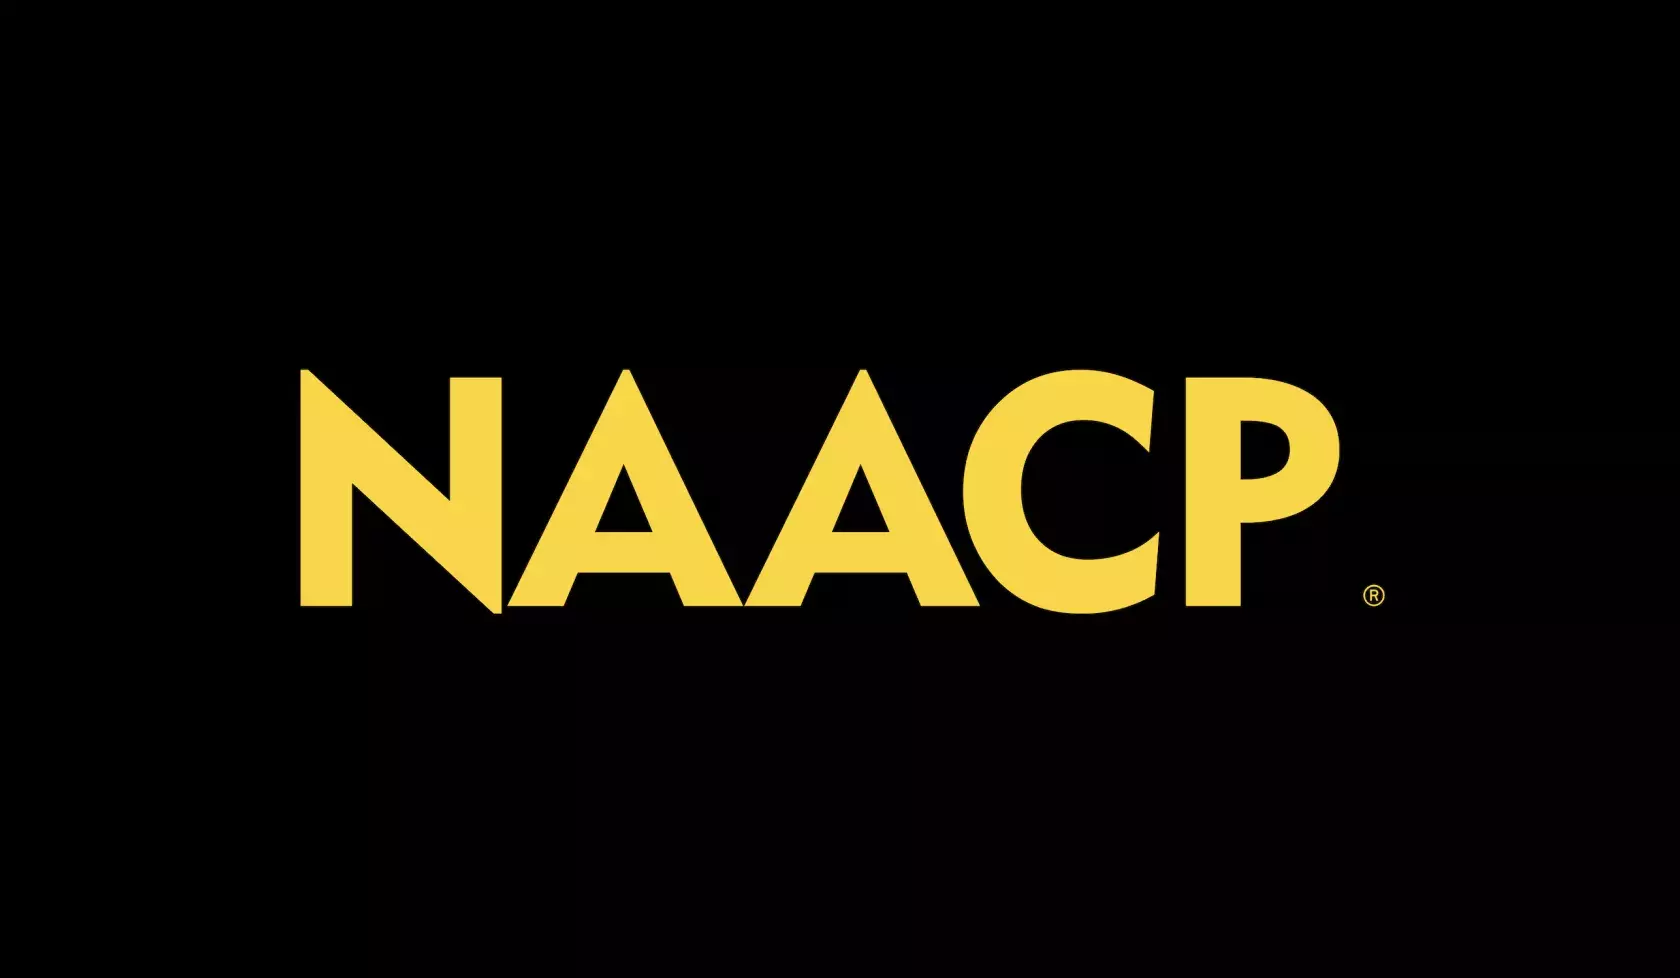 NAACP - Statement Cover with logo - Gold - cropped